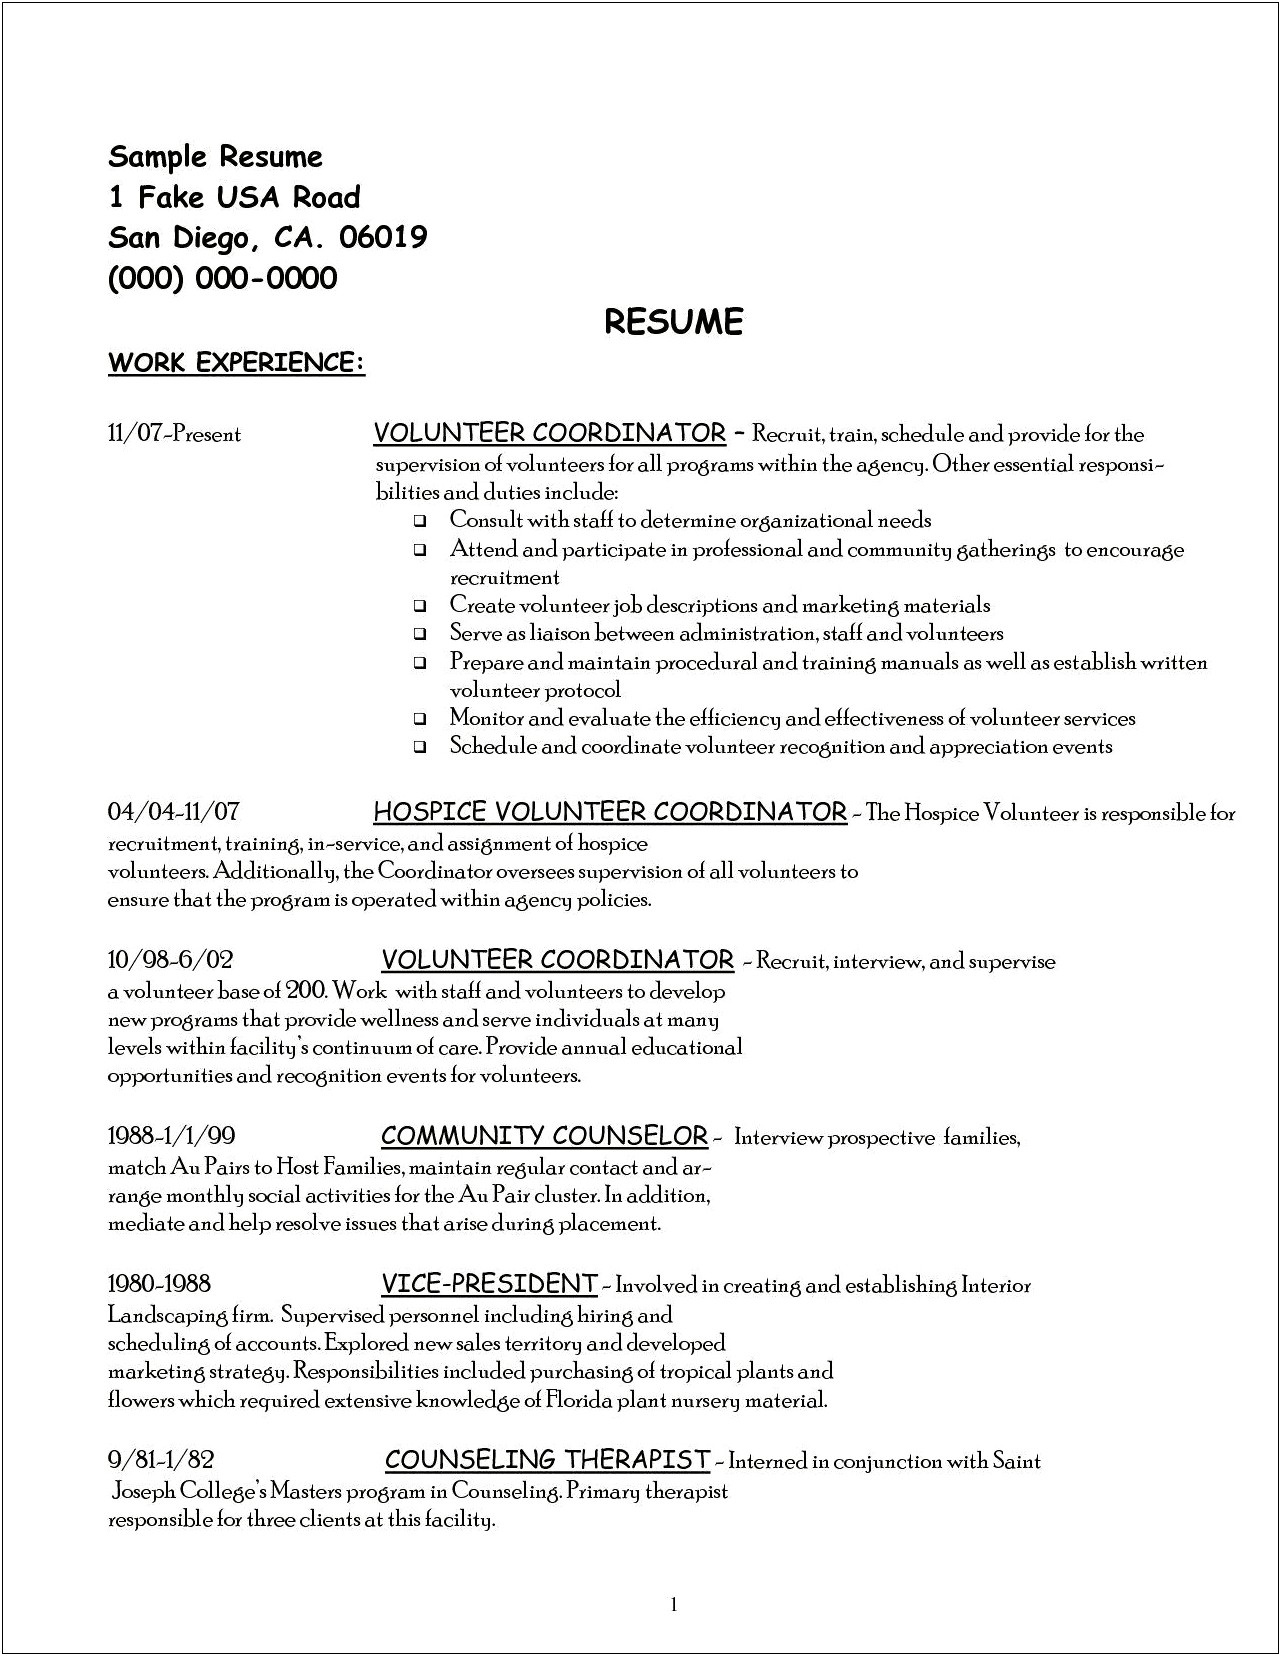 Resume With Volunteer Experience And Work Experience